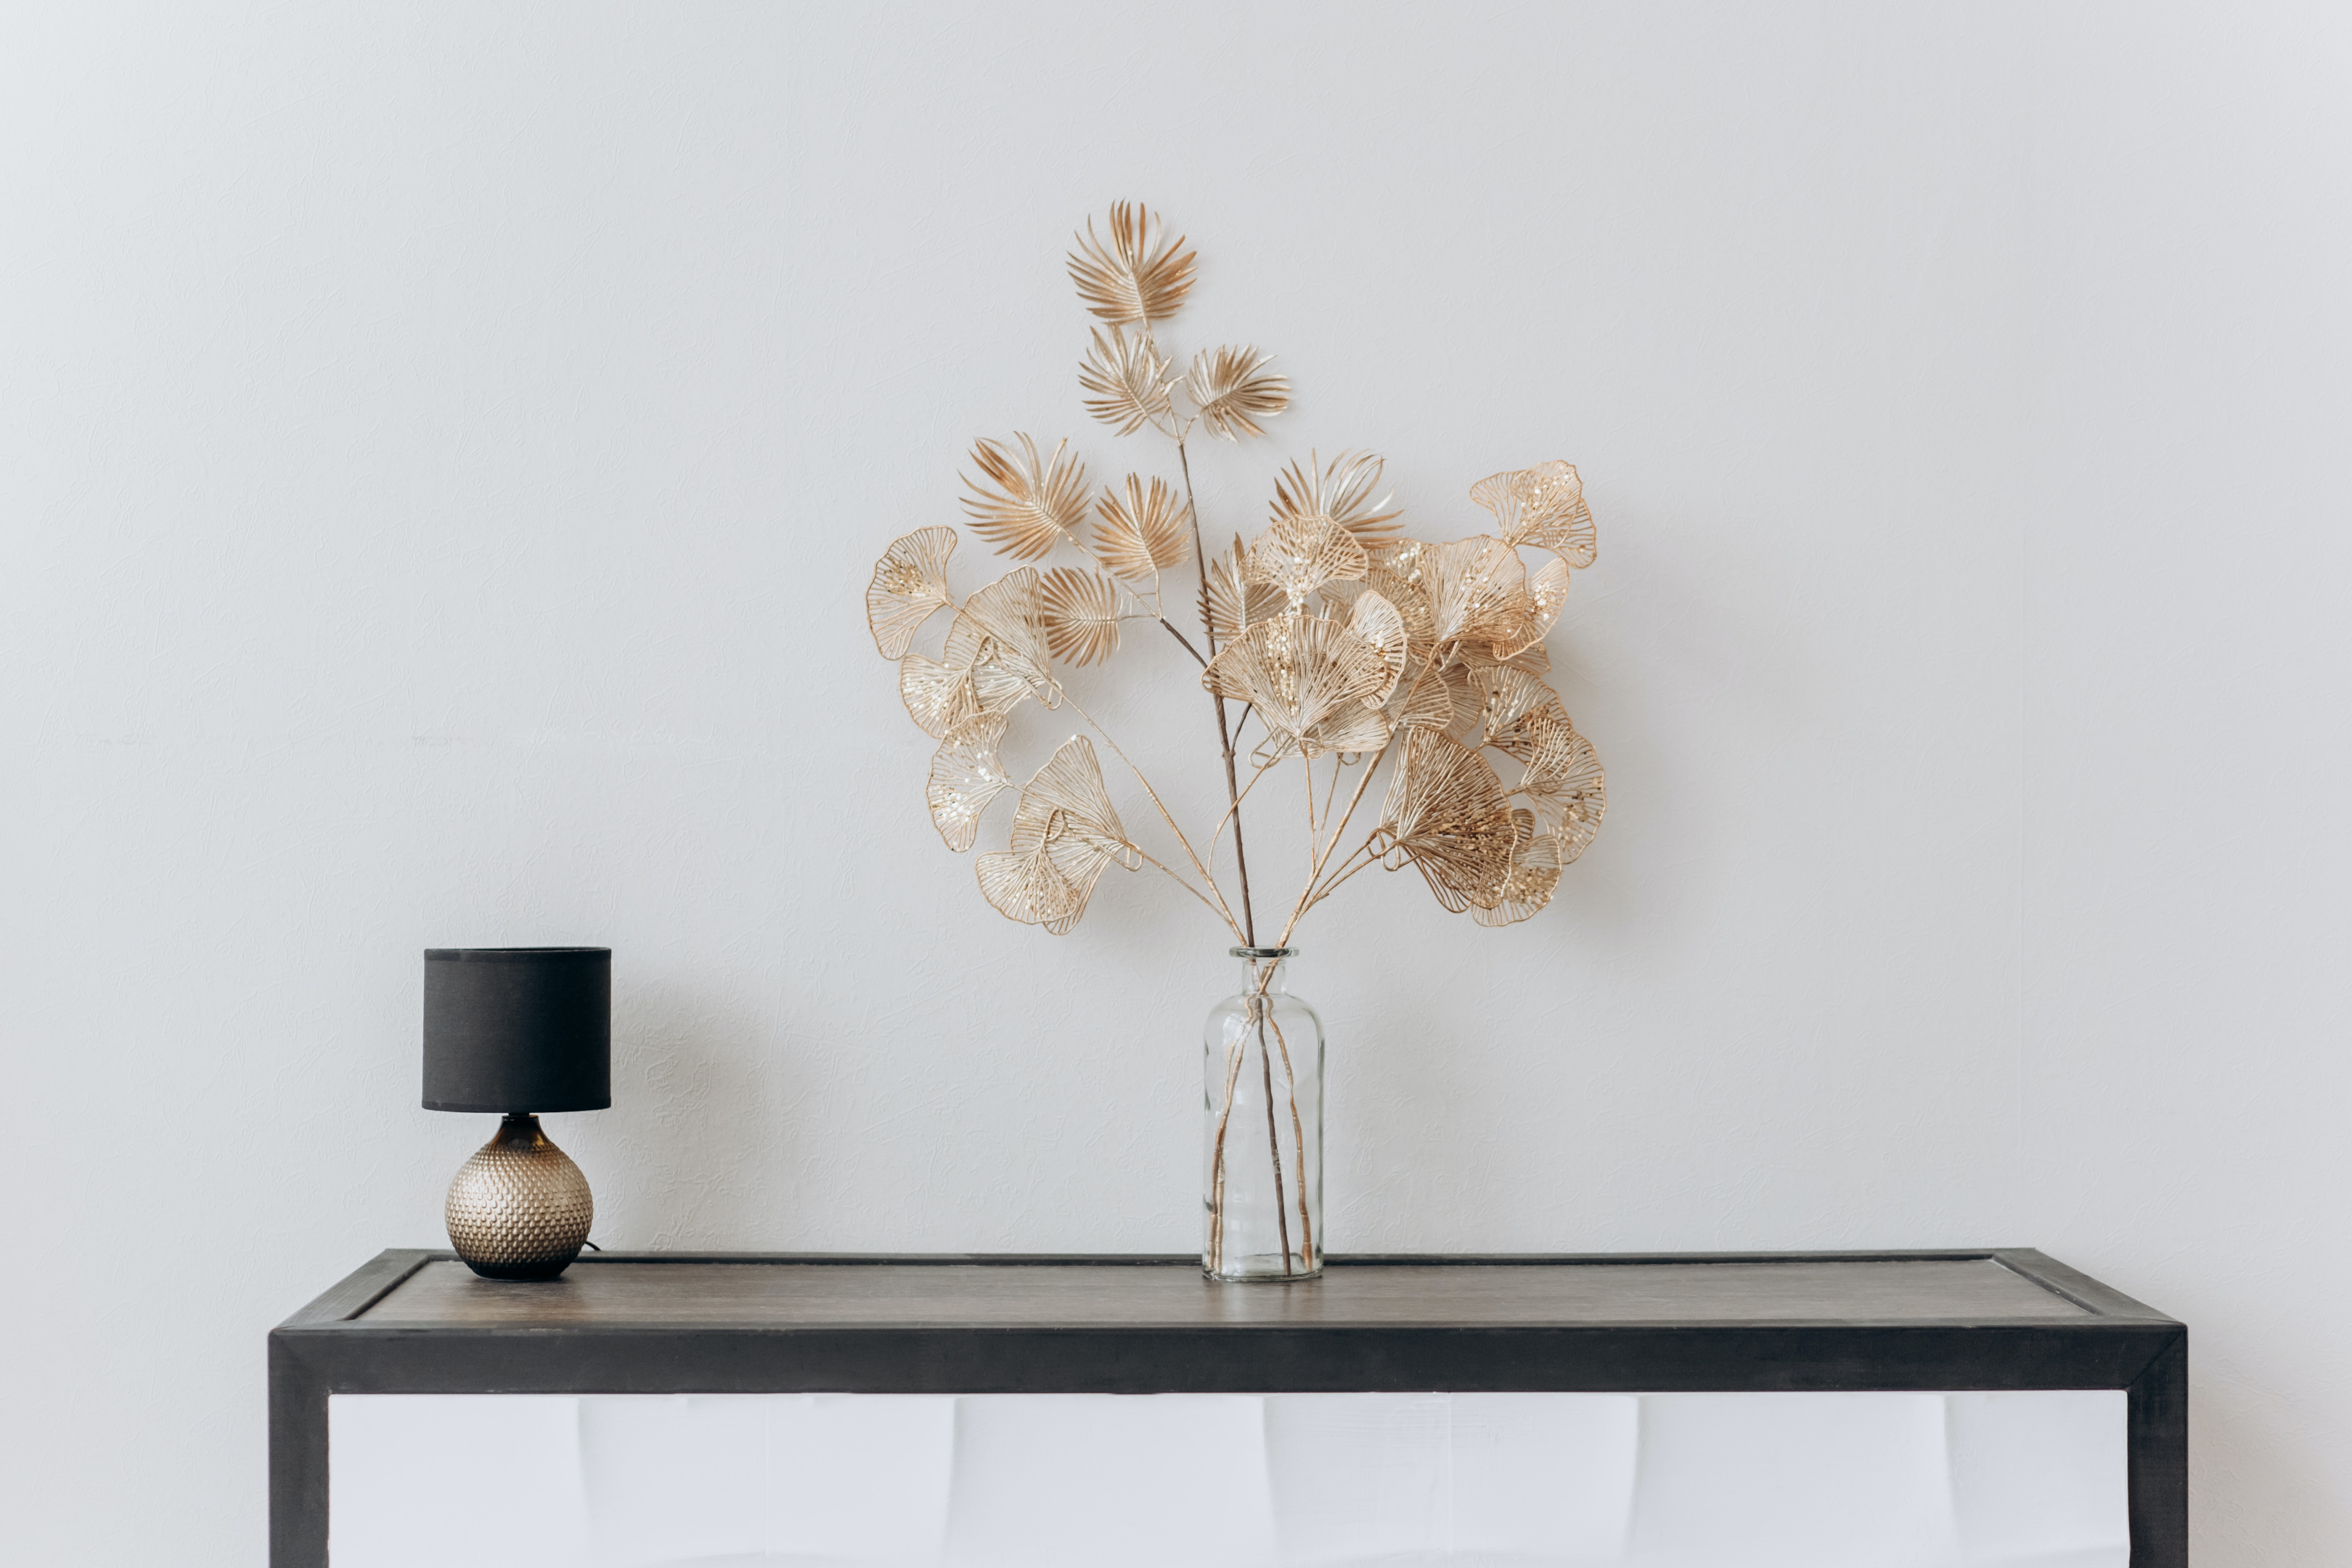 decorative flower vase and lamp on black console table